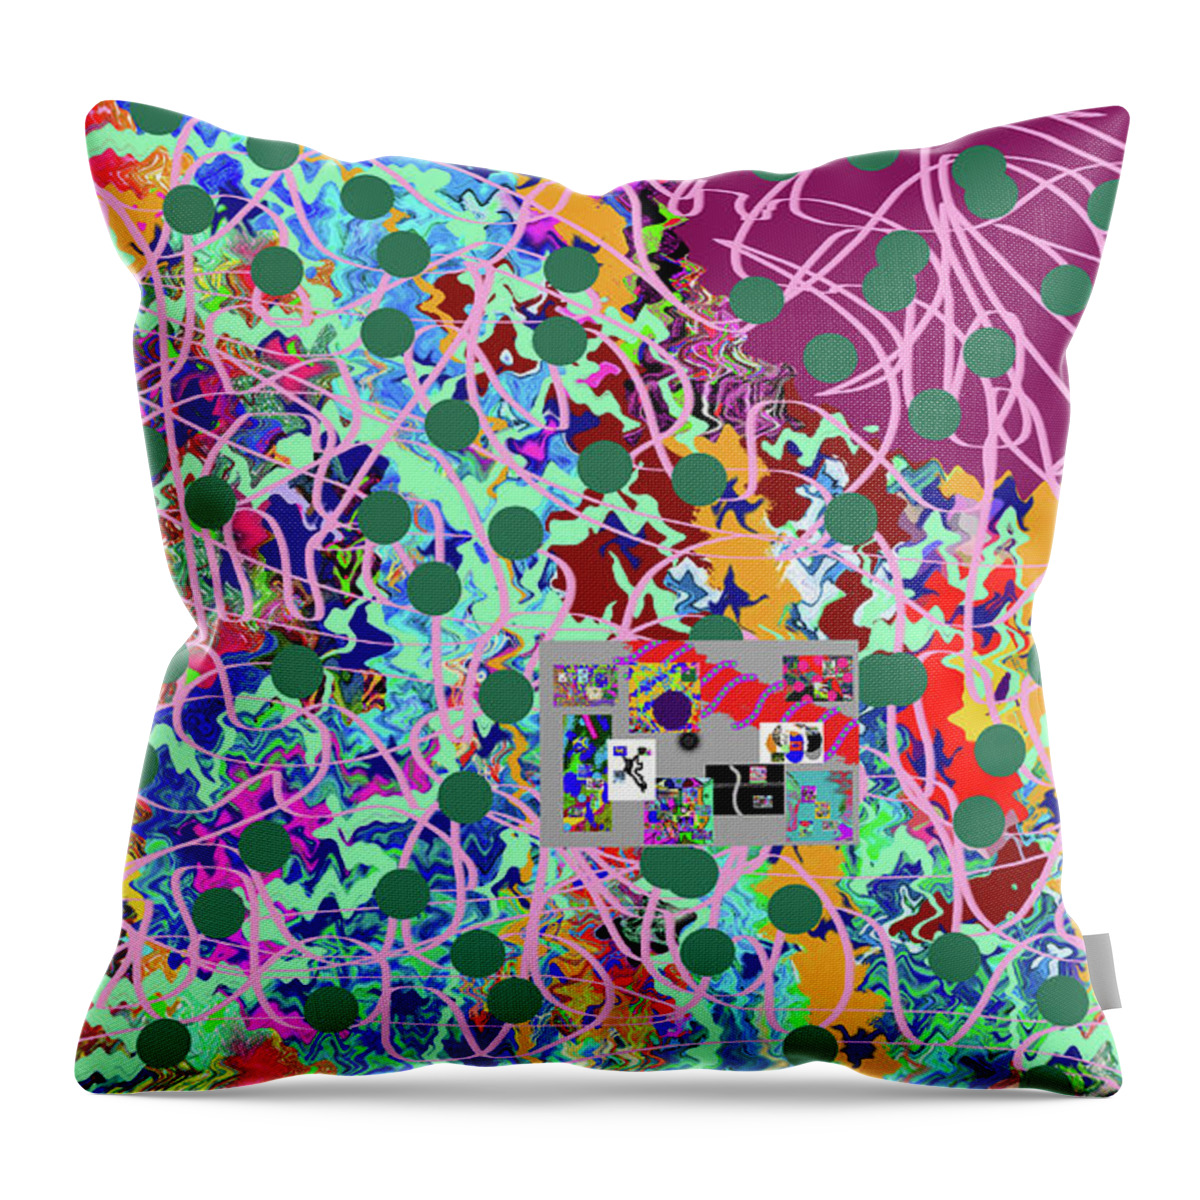 Walter Paul Bebirian: Volord Kingdom Art Collection Grand Gallery Throw Pillow featuring the digital art 7-29-2021a by Walter Paul Bebirian